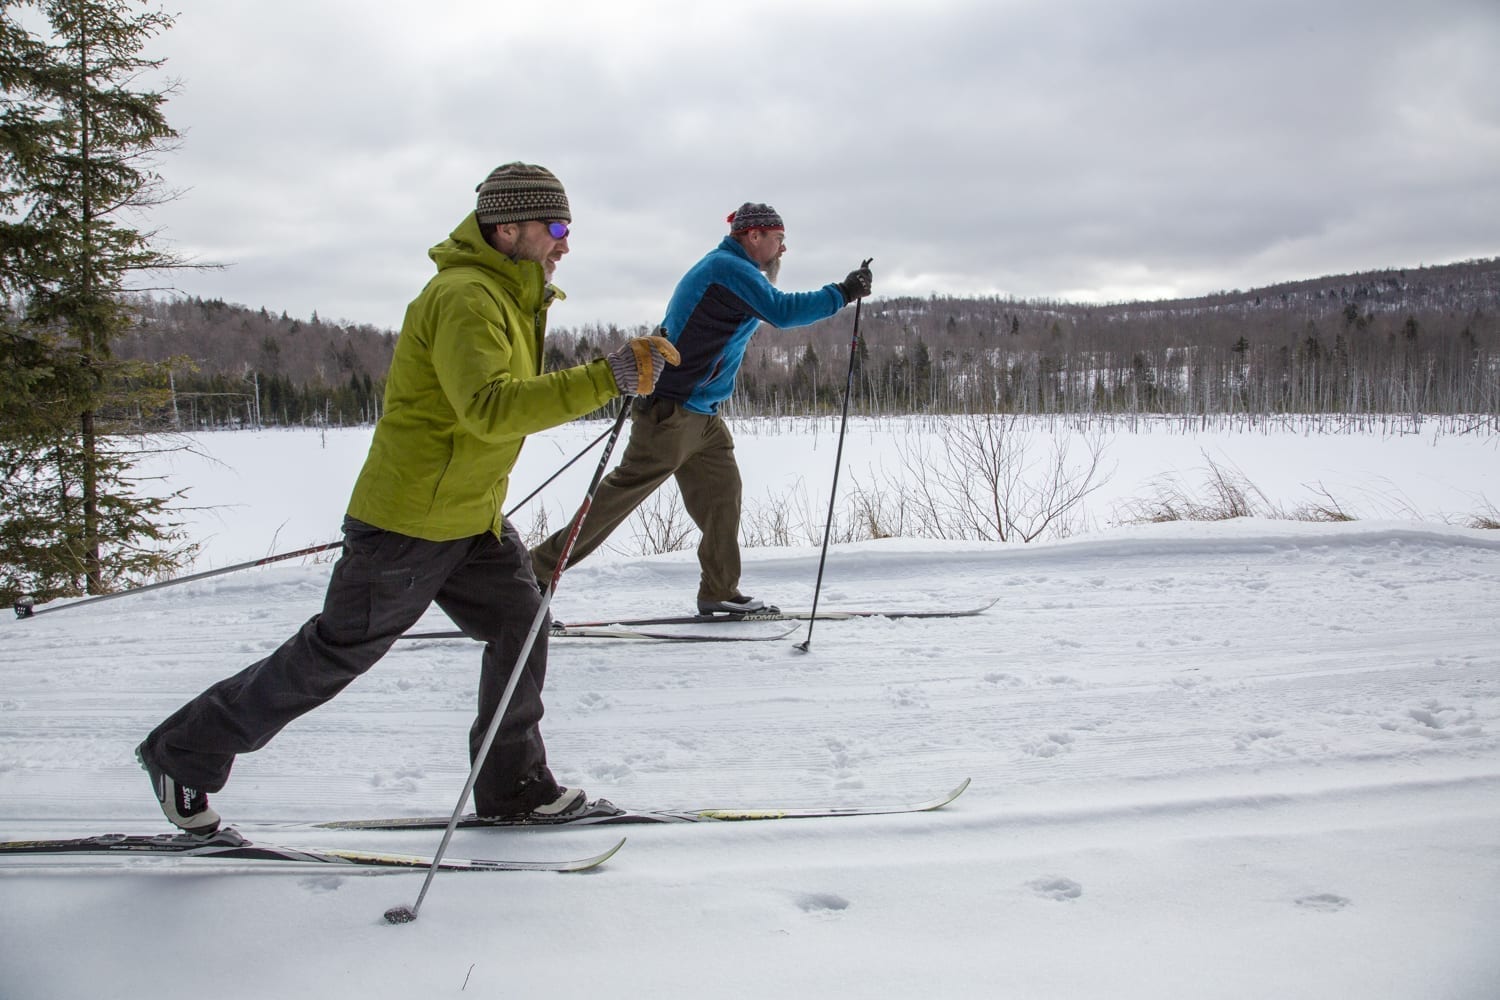 John Gills, back, and Eric Lanthier ski the James Frenette Trails in Tupper Lake. Photo by Mike Lynch